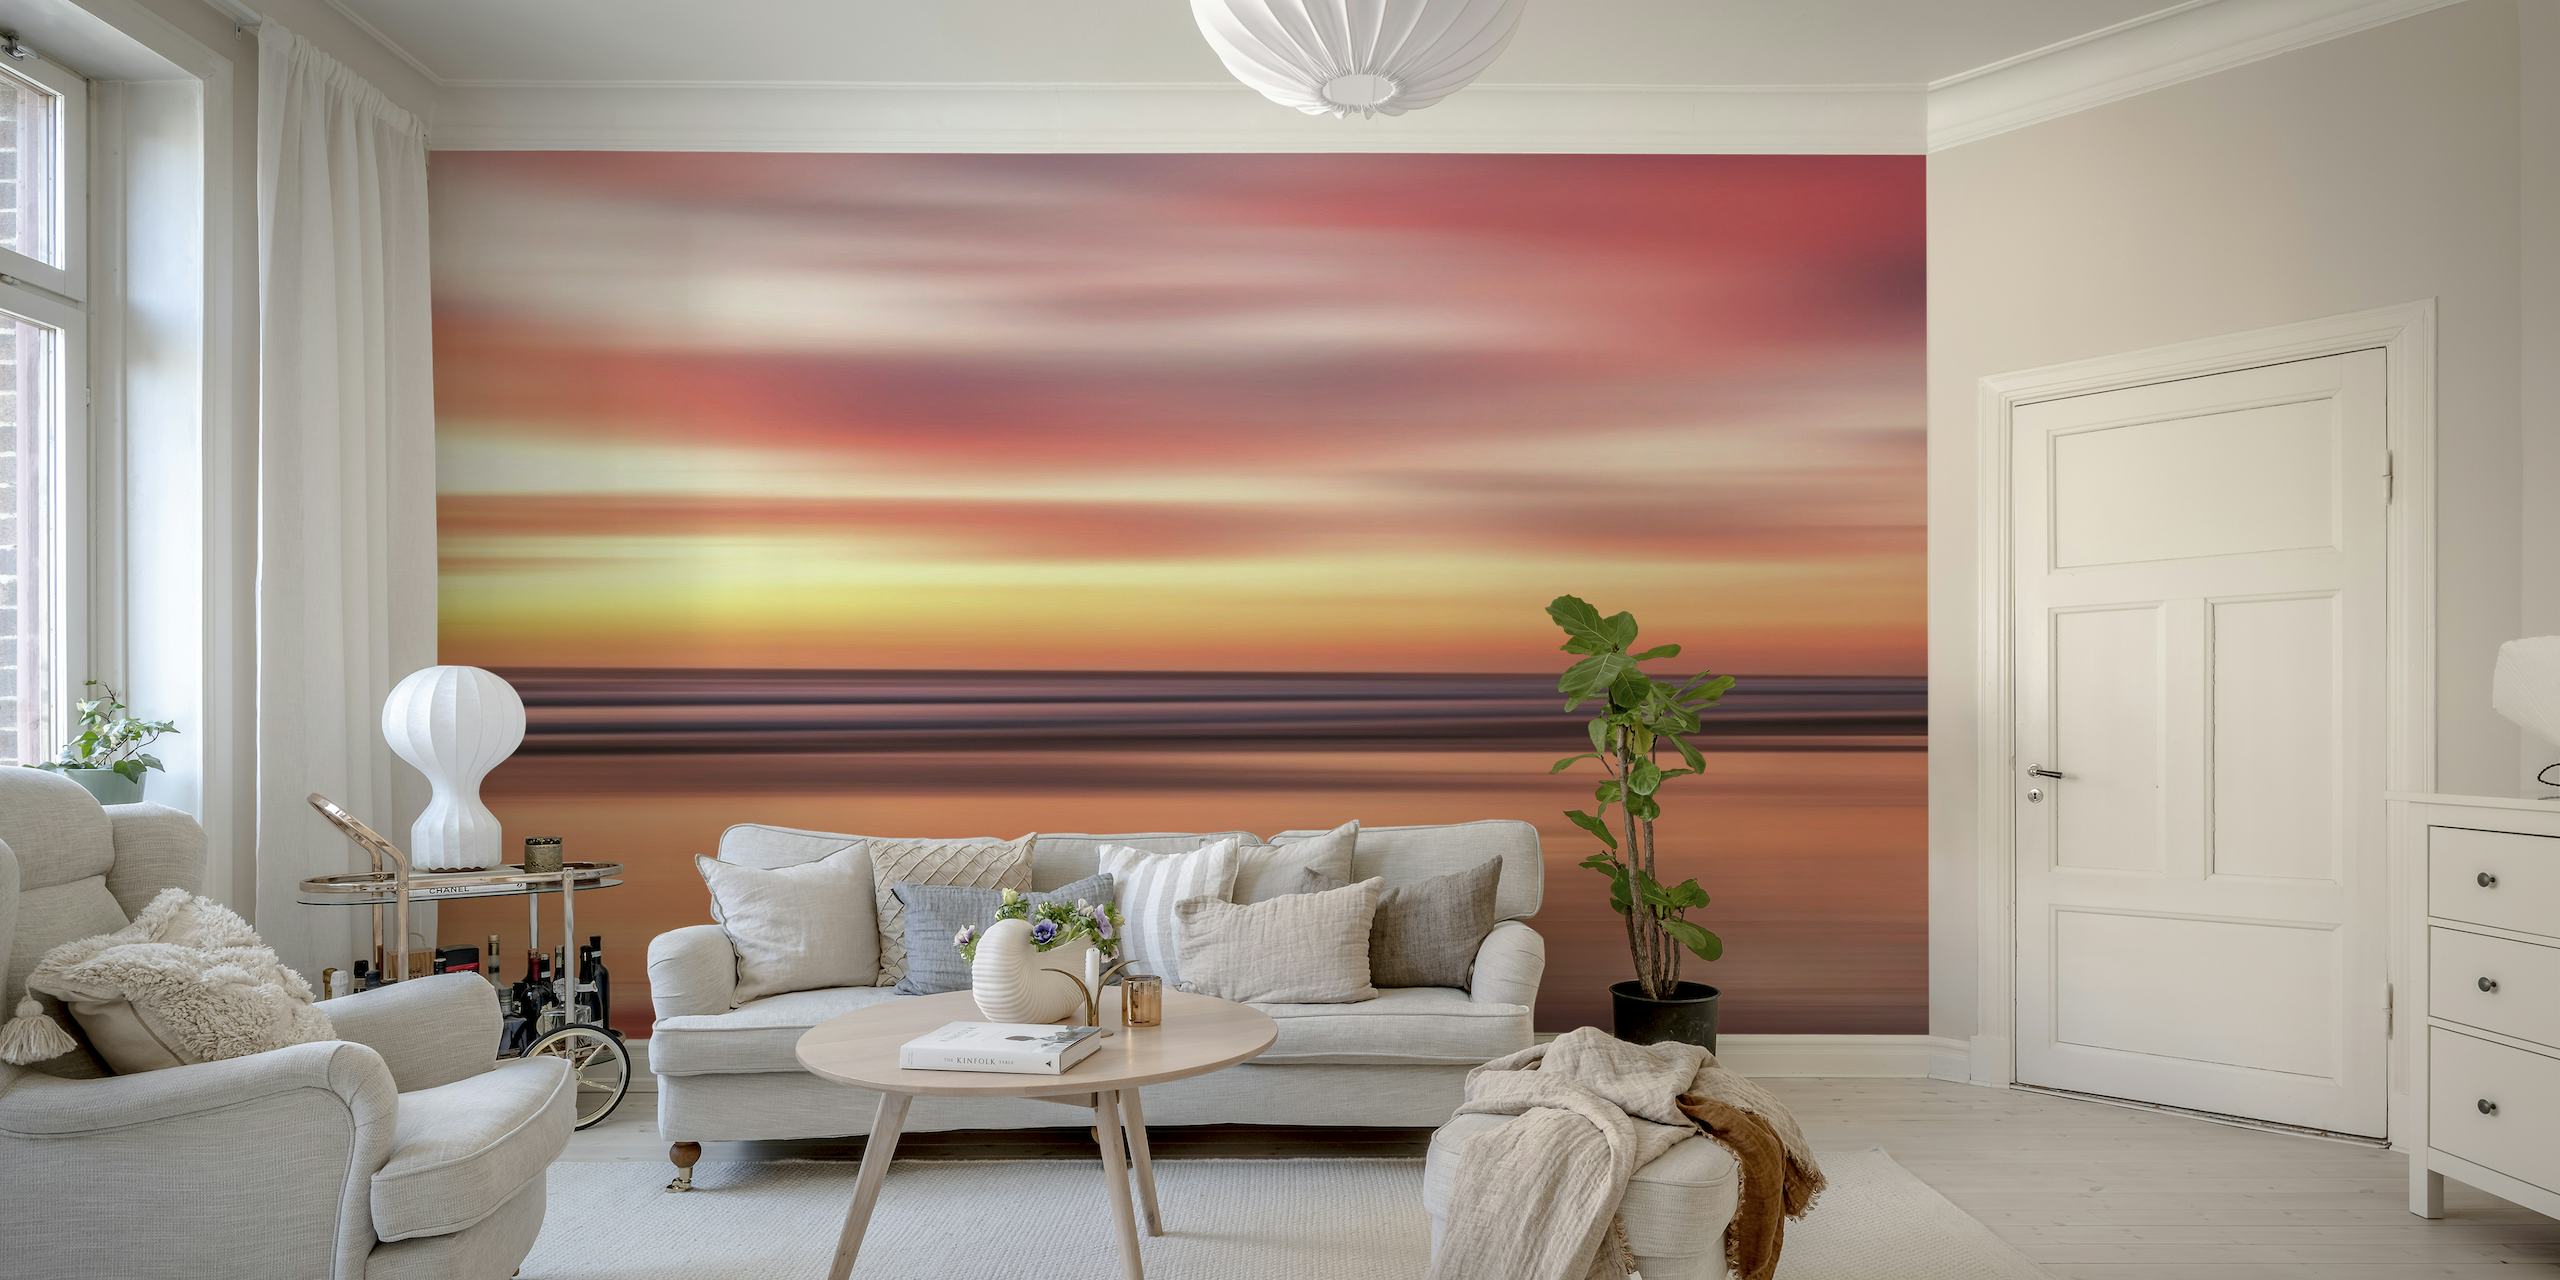 Sunset Summer 9 wall mural with vivid pink and orange hues reflecting off calm waters